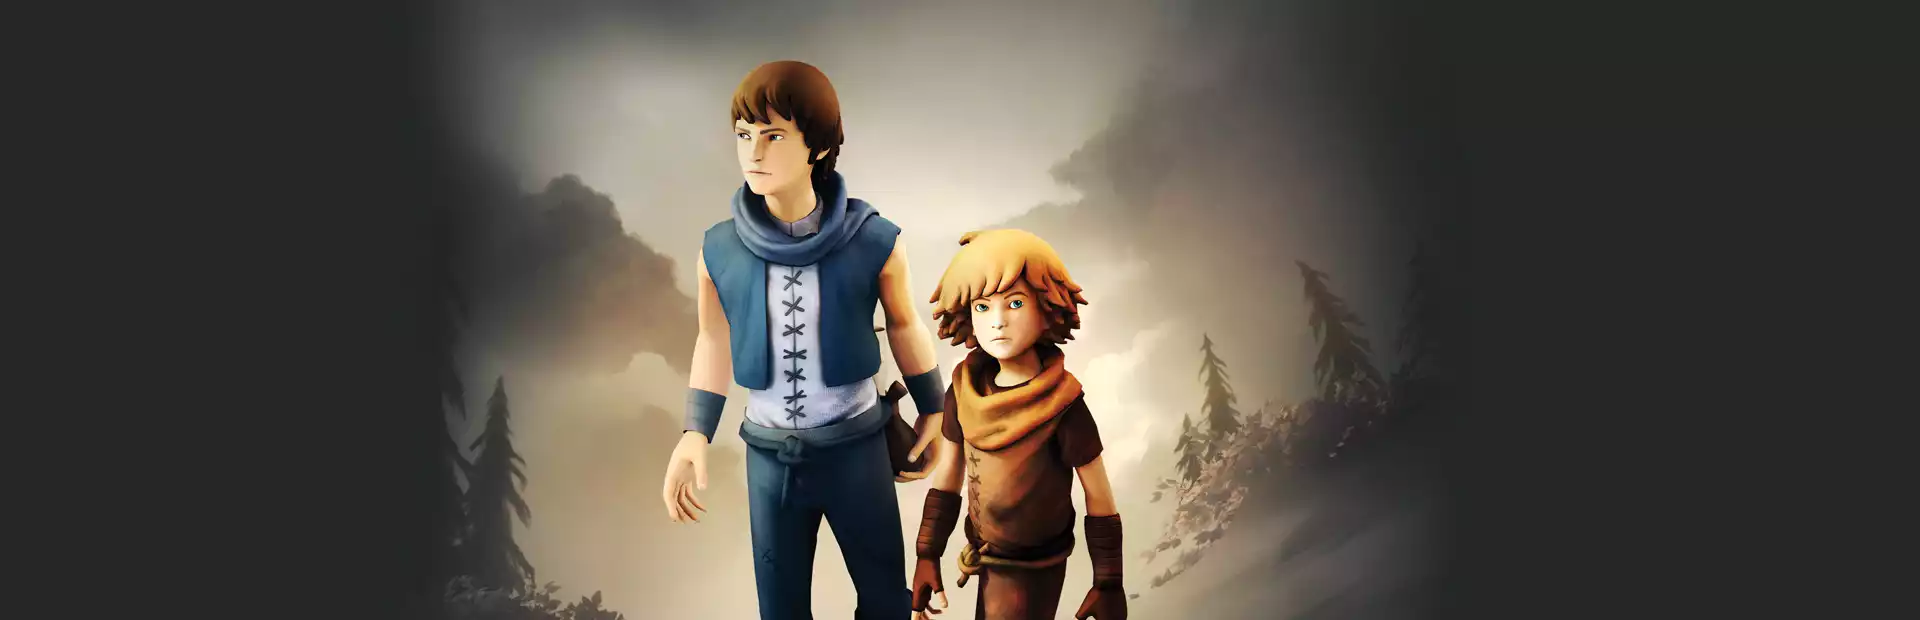 Brothers A Tale of Two Sons Steam Key GLOBAL